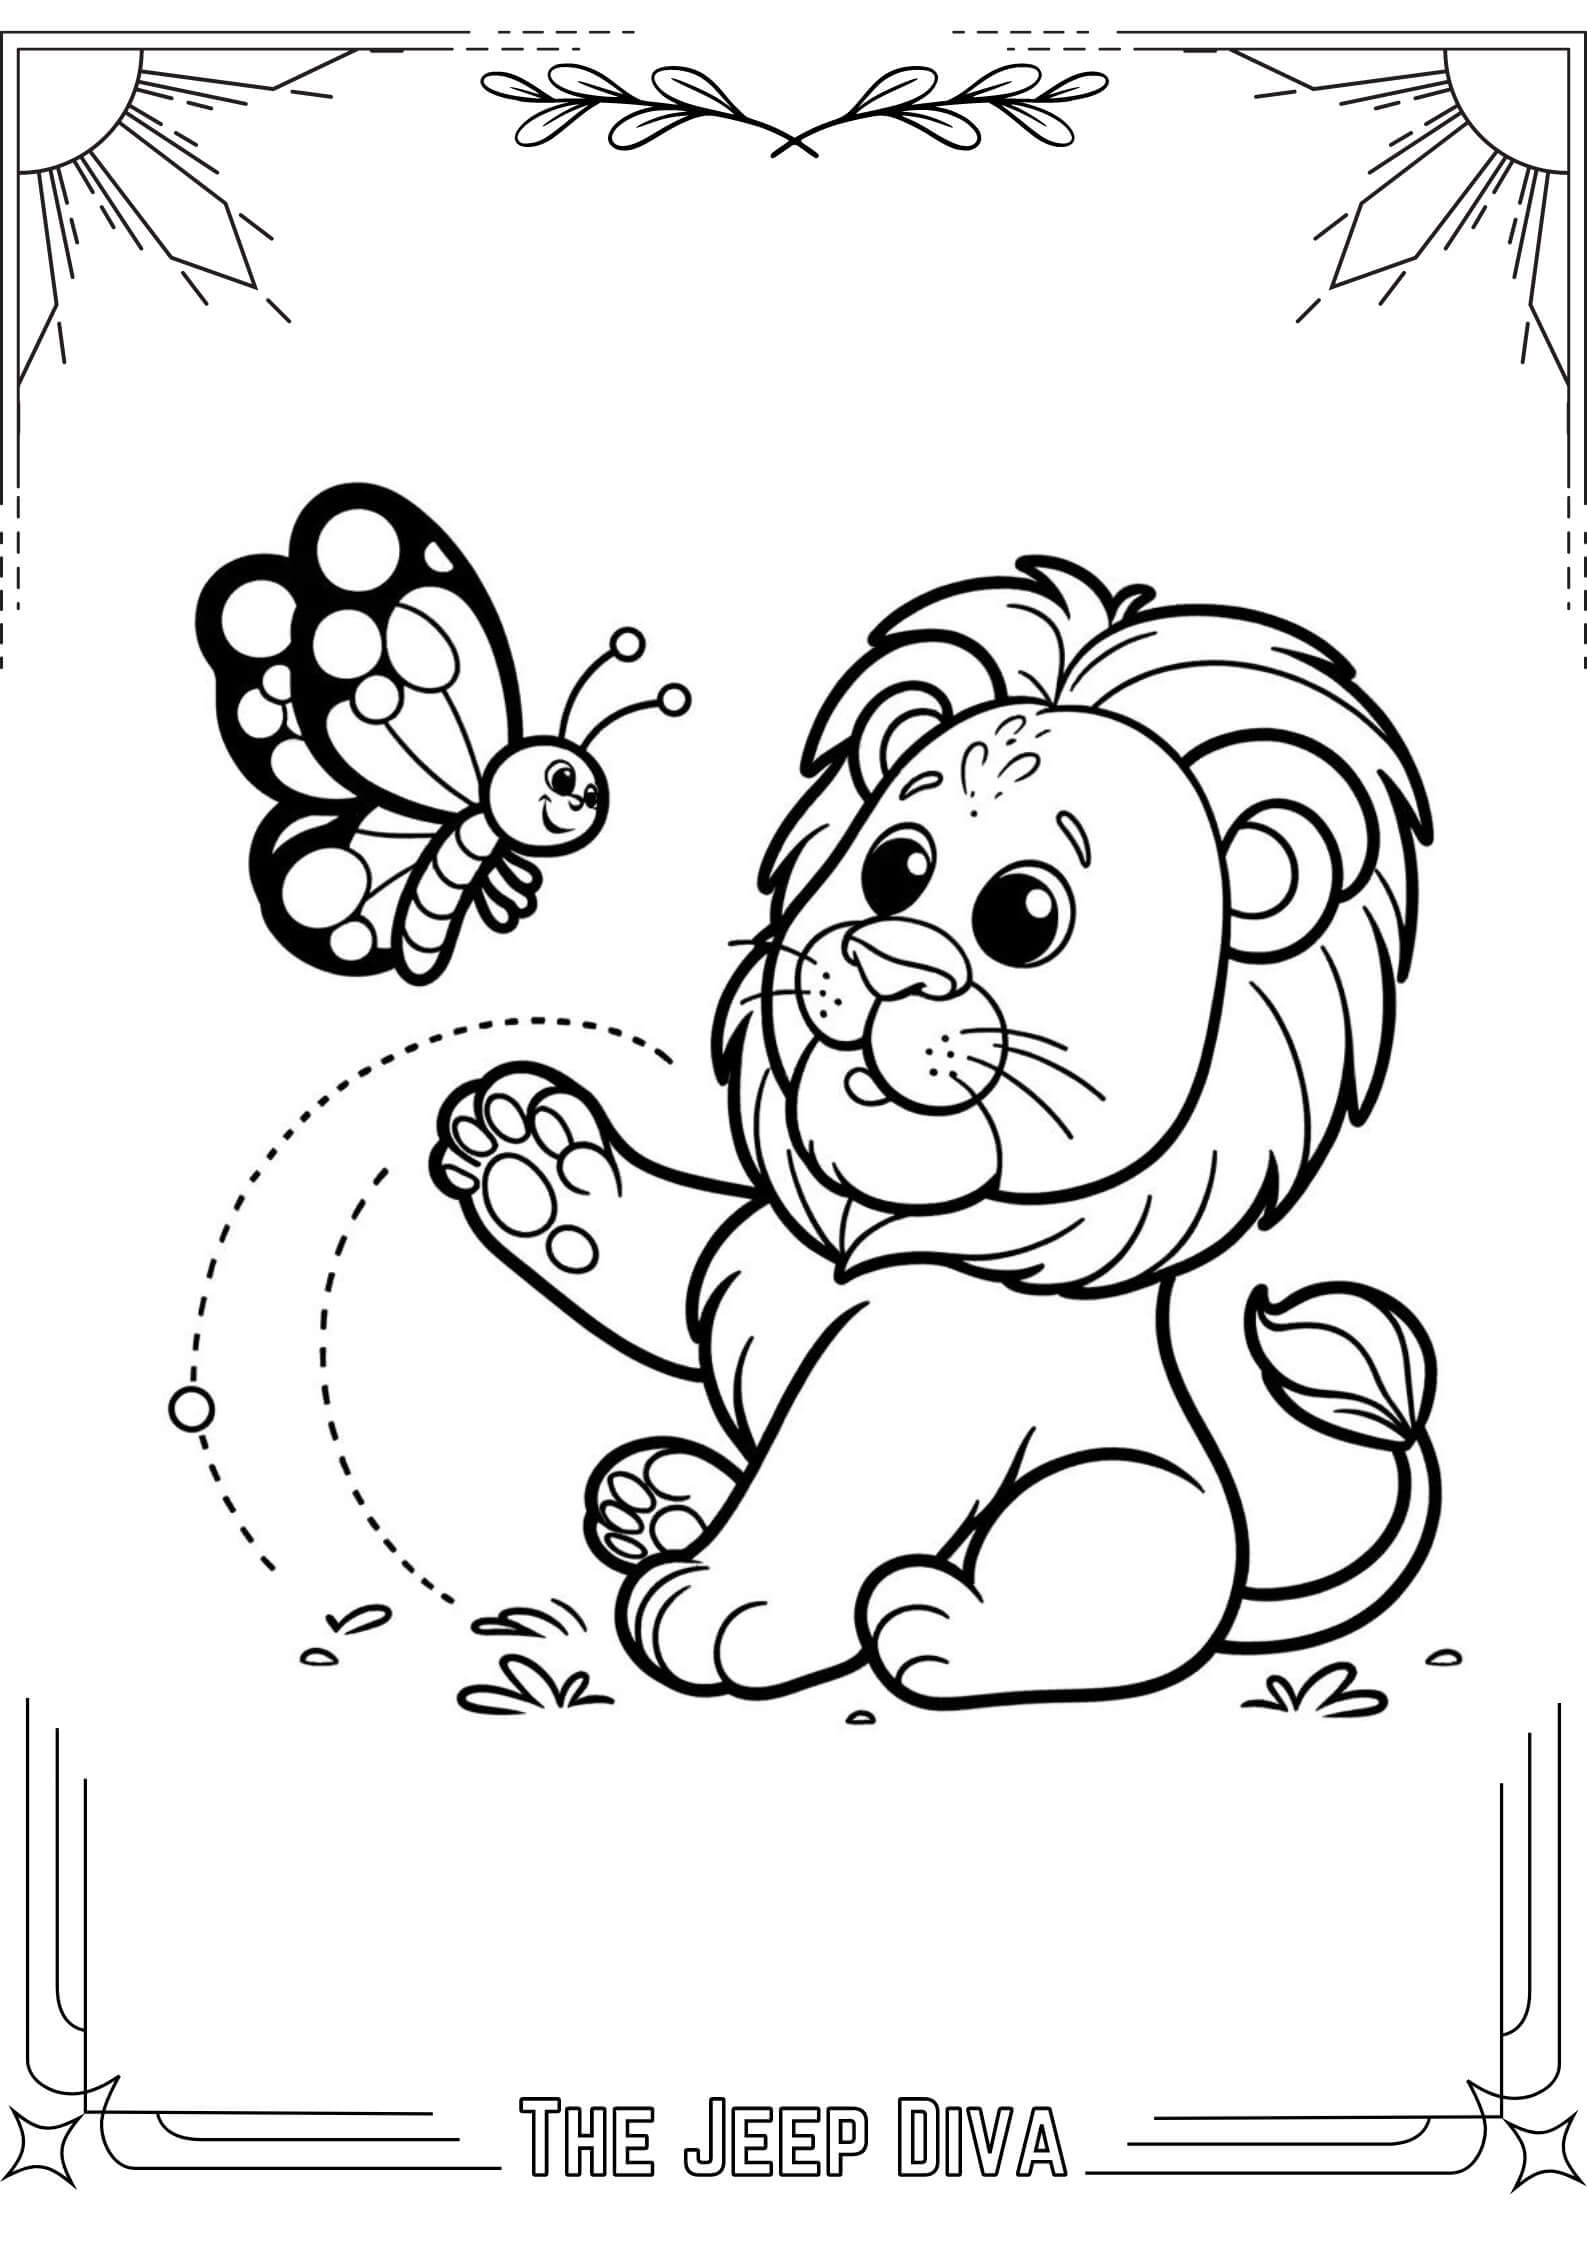 The Jeep Diva Coloring Page Lion Medium Difficulty 21